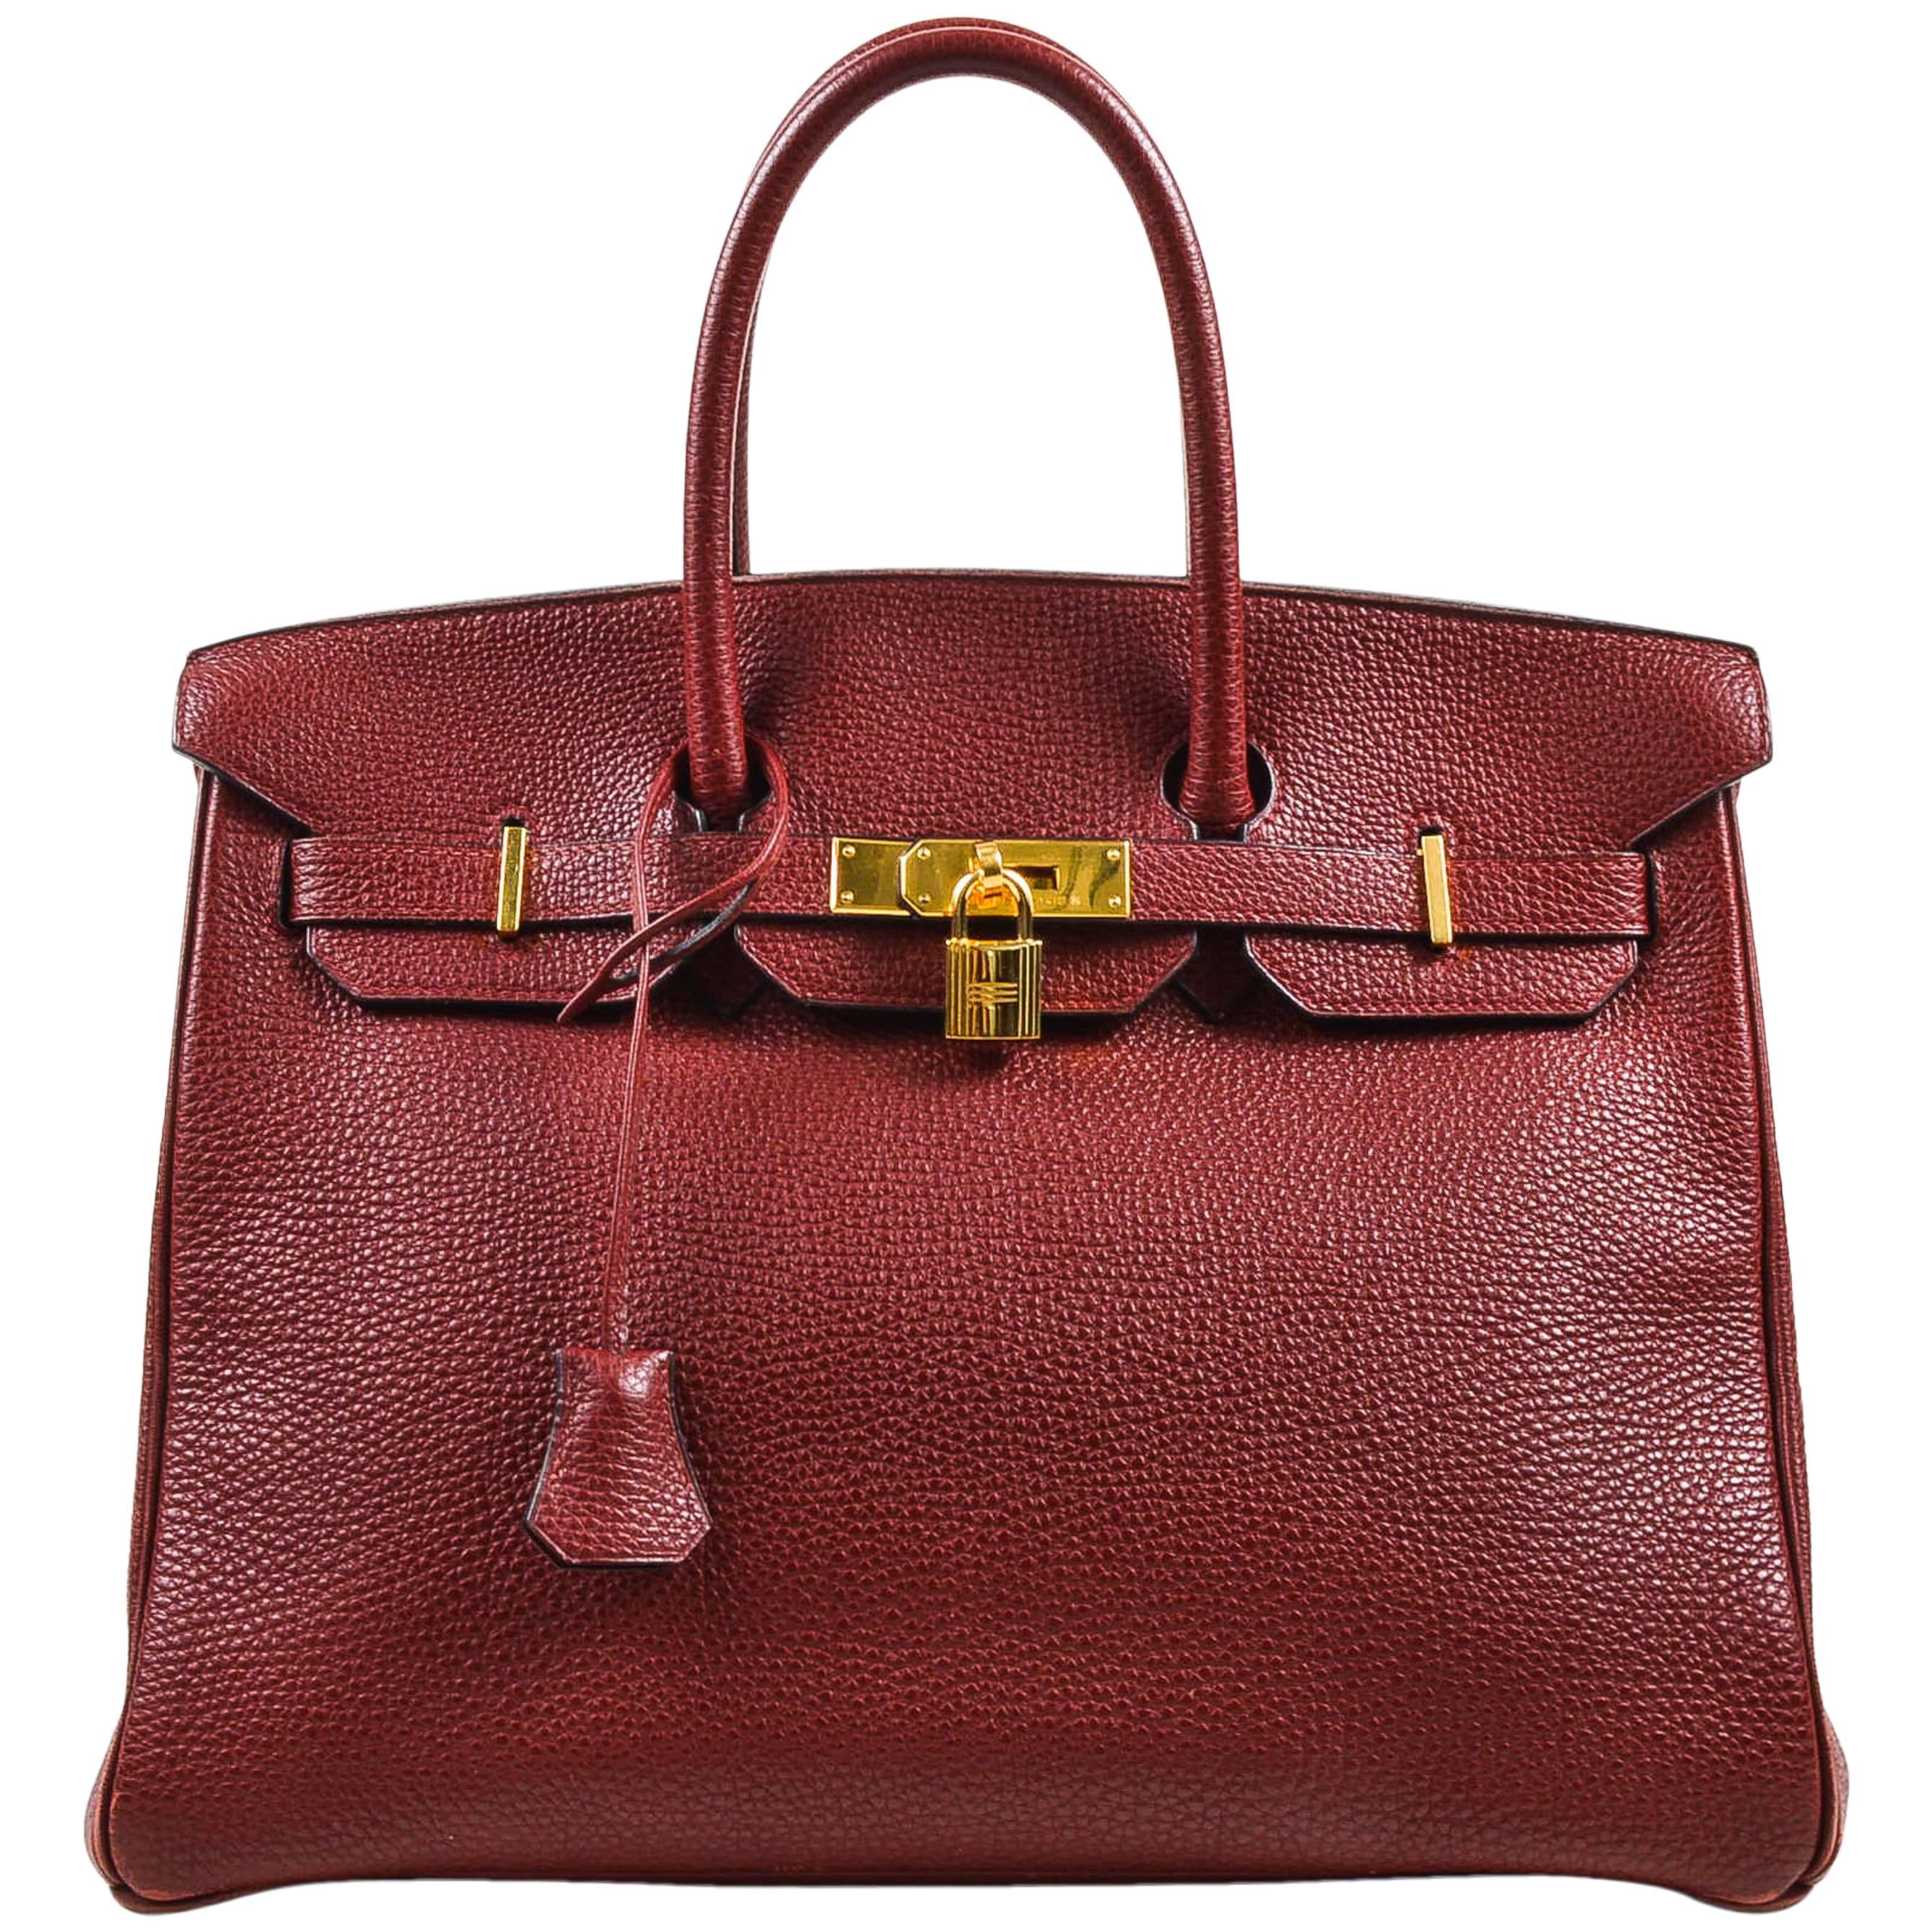 Hermes Dark Red "Rouge" Clemence Leather Flap "Birkin" Tote Bag SZ 35 cm For Sale